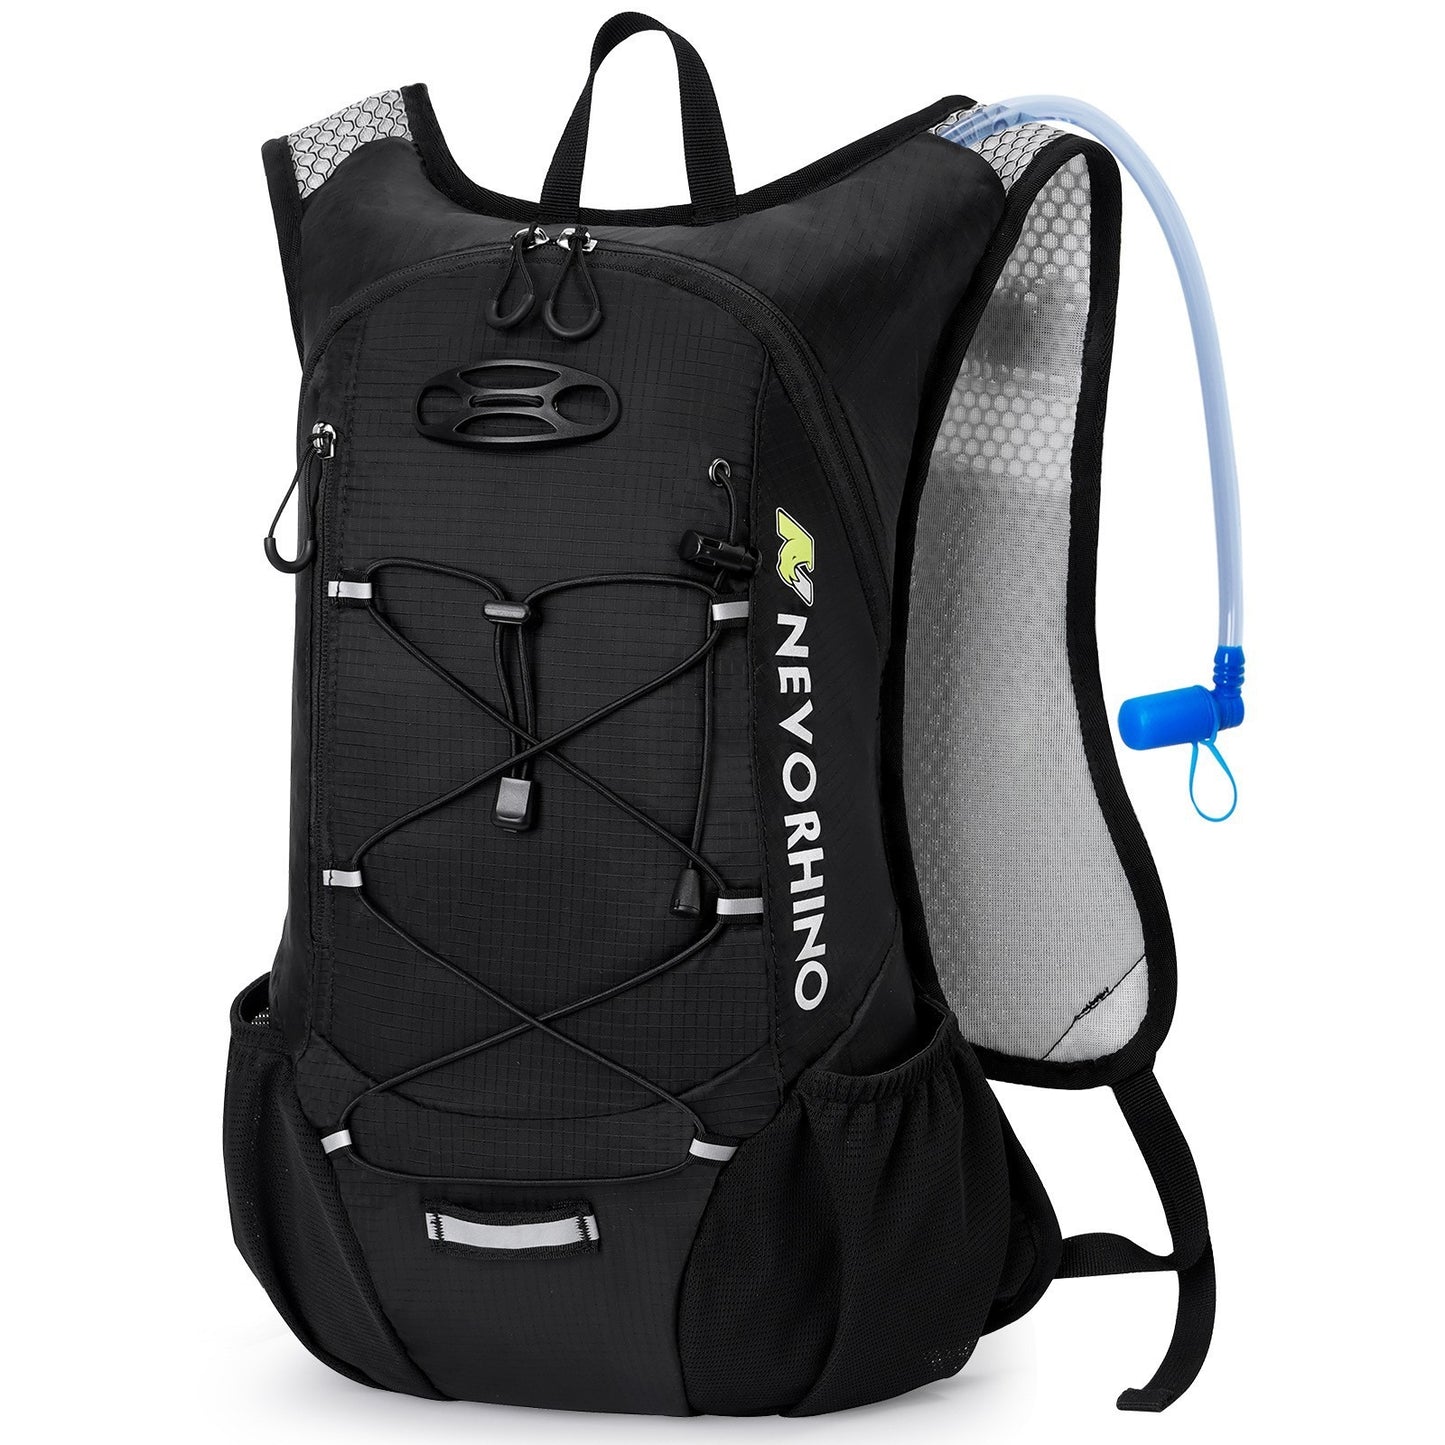 Hiking Bag Outdoor Sports Water Bag Oxford Cloth Backpack Ultra Light Hiking Bag Cycling Water Bag Backpack